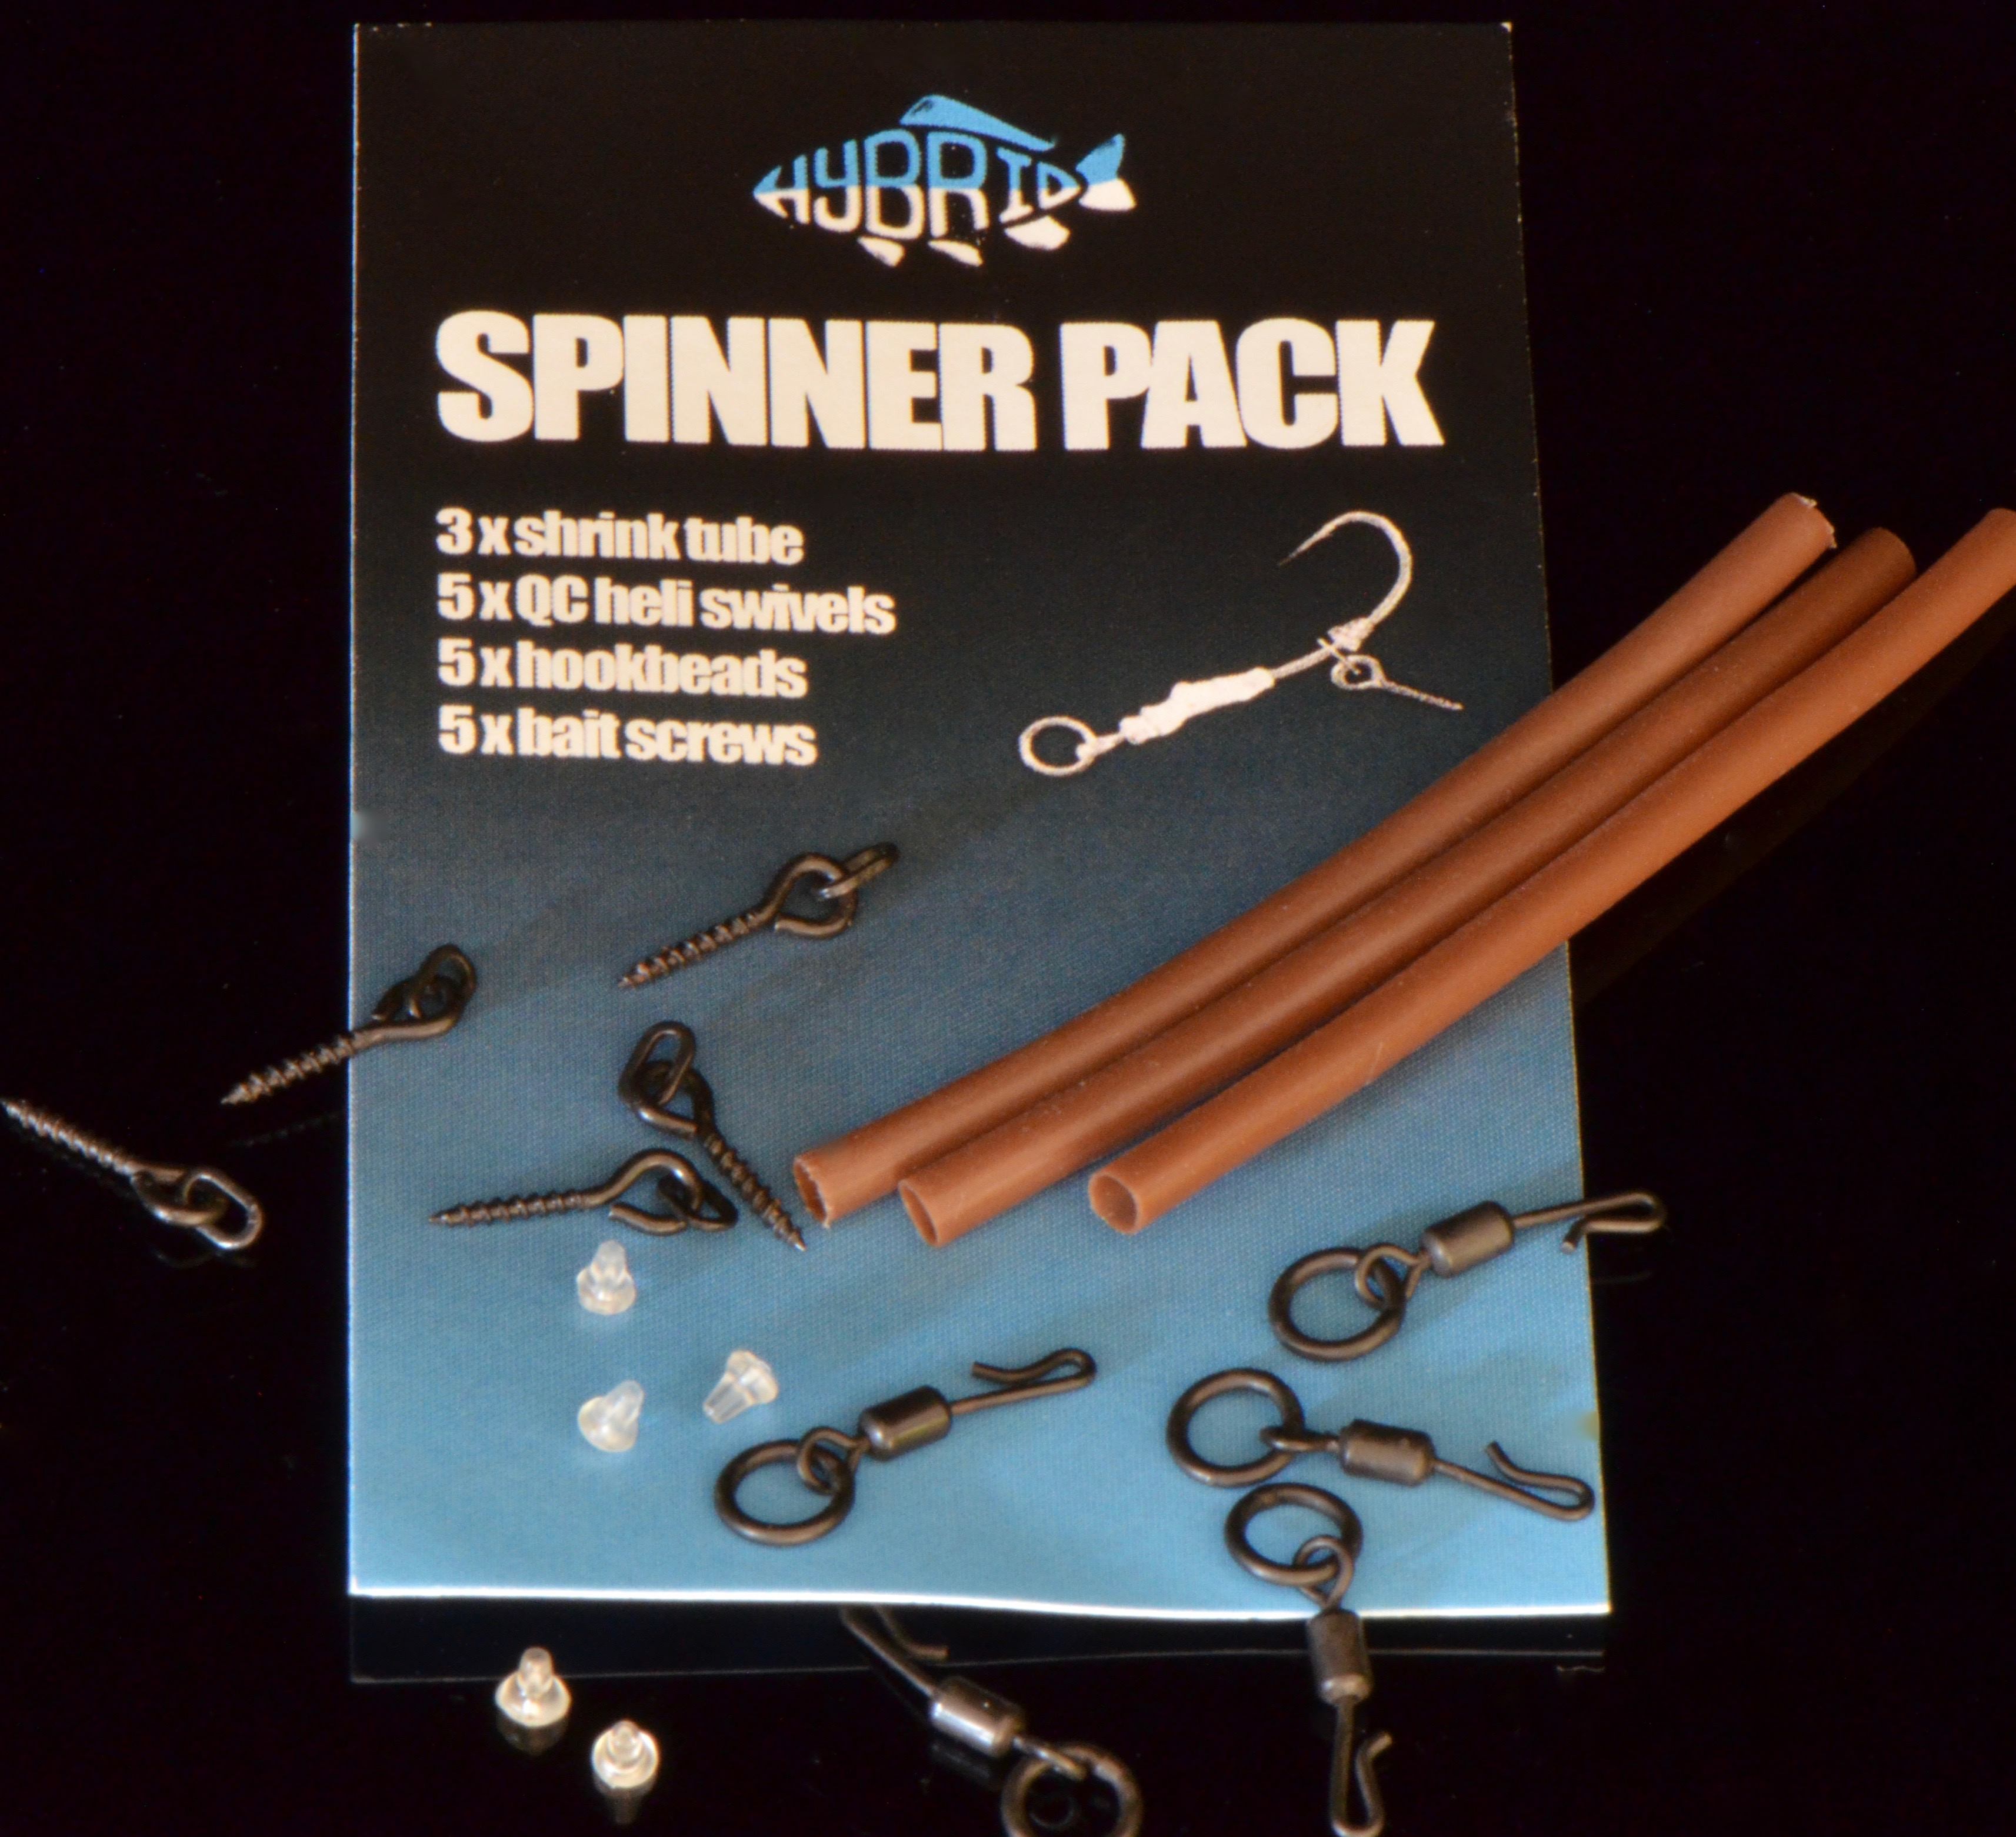 Create A Ronnie Rig - New 60 Piece Carp Fishing Spinner Rig Component Set  Bundle From the Fishonlinestore., Fish Online Store UK